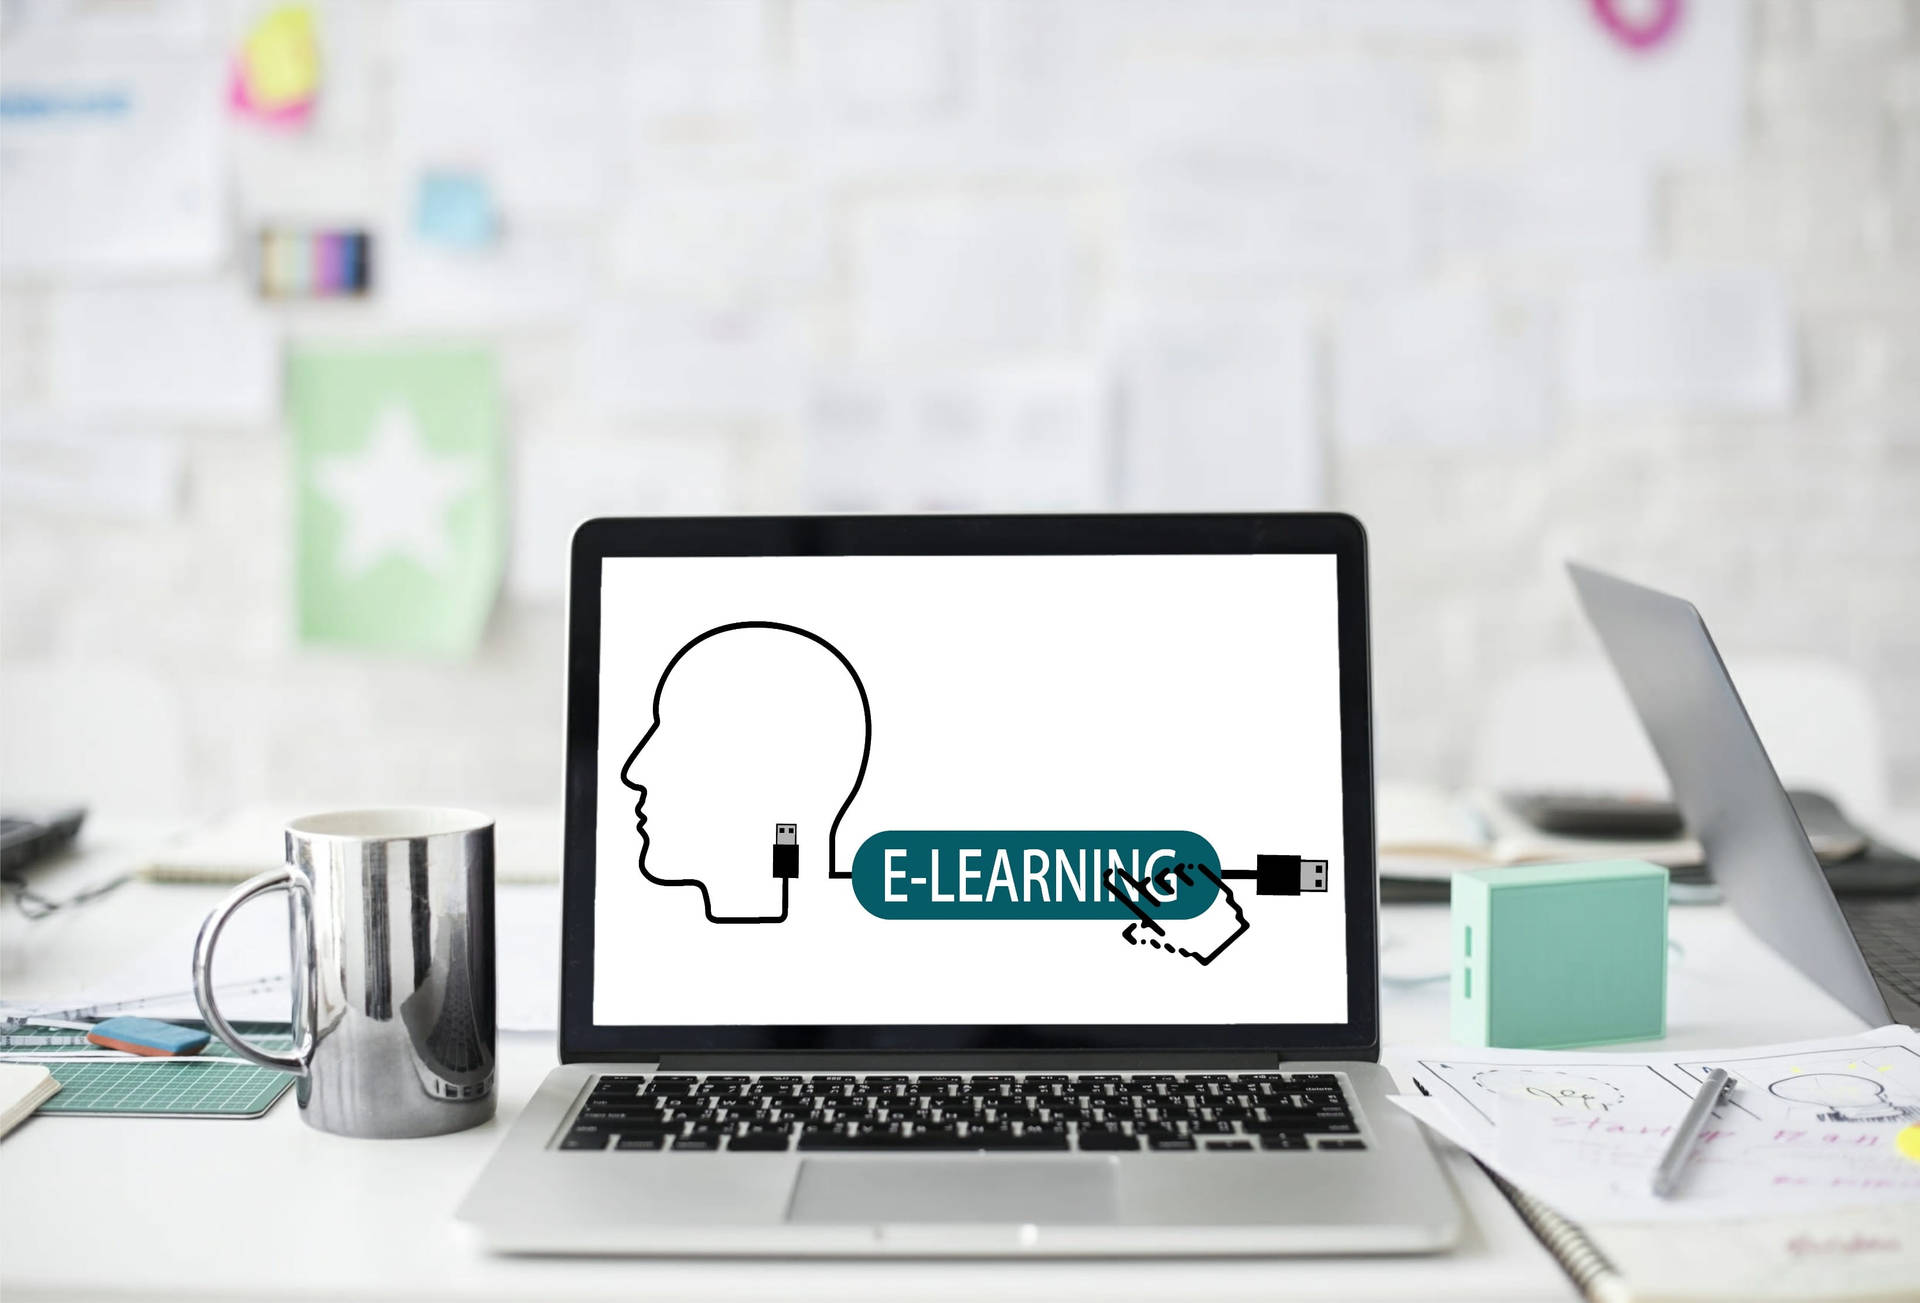 E-learning Graphics On Laptop Background